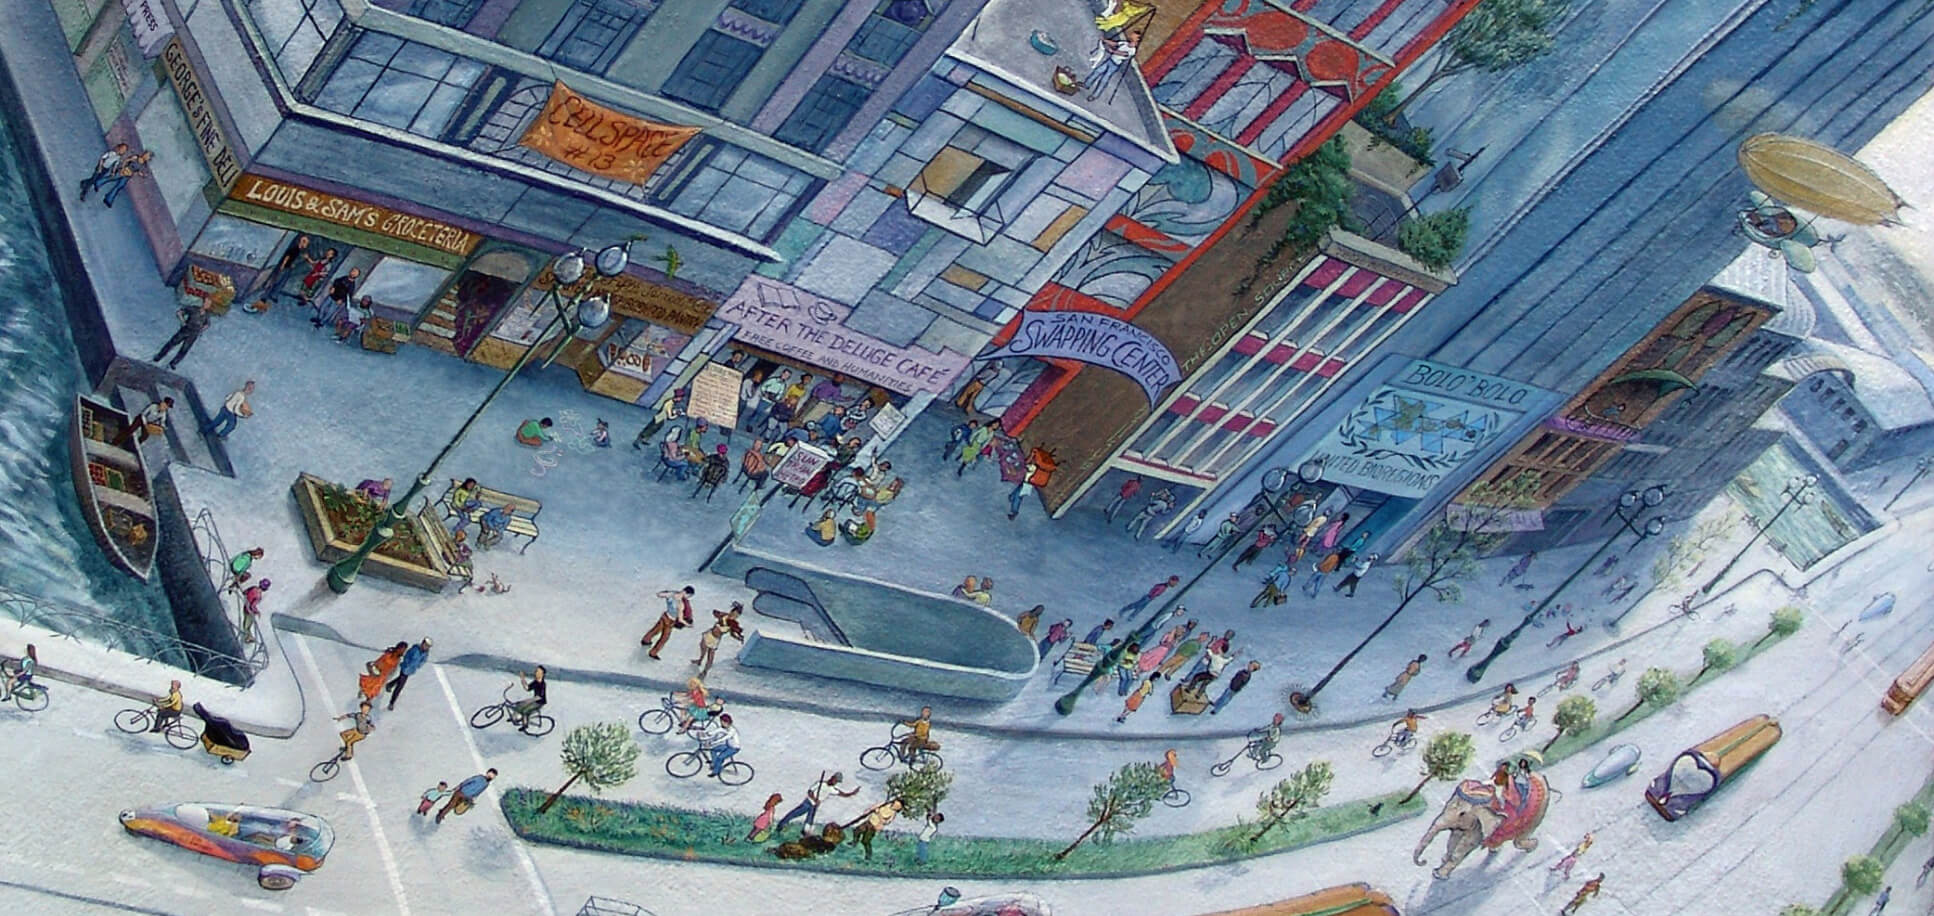 The last panel of the Market Street Railway mural portraying the future